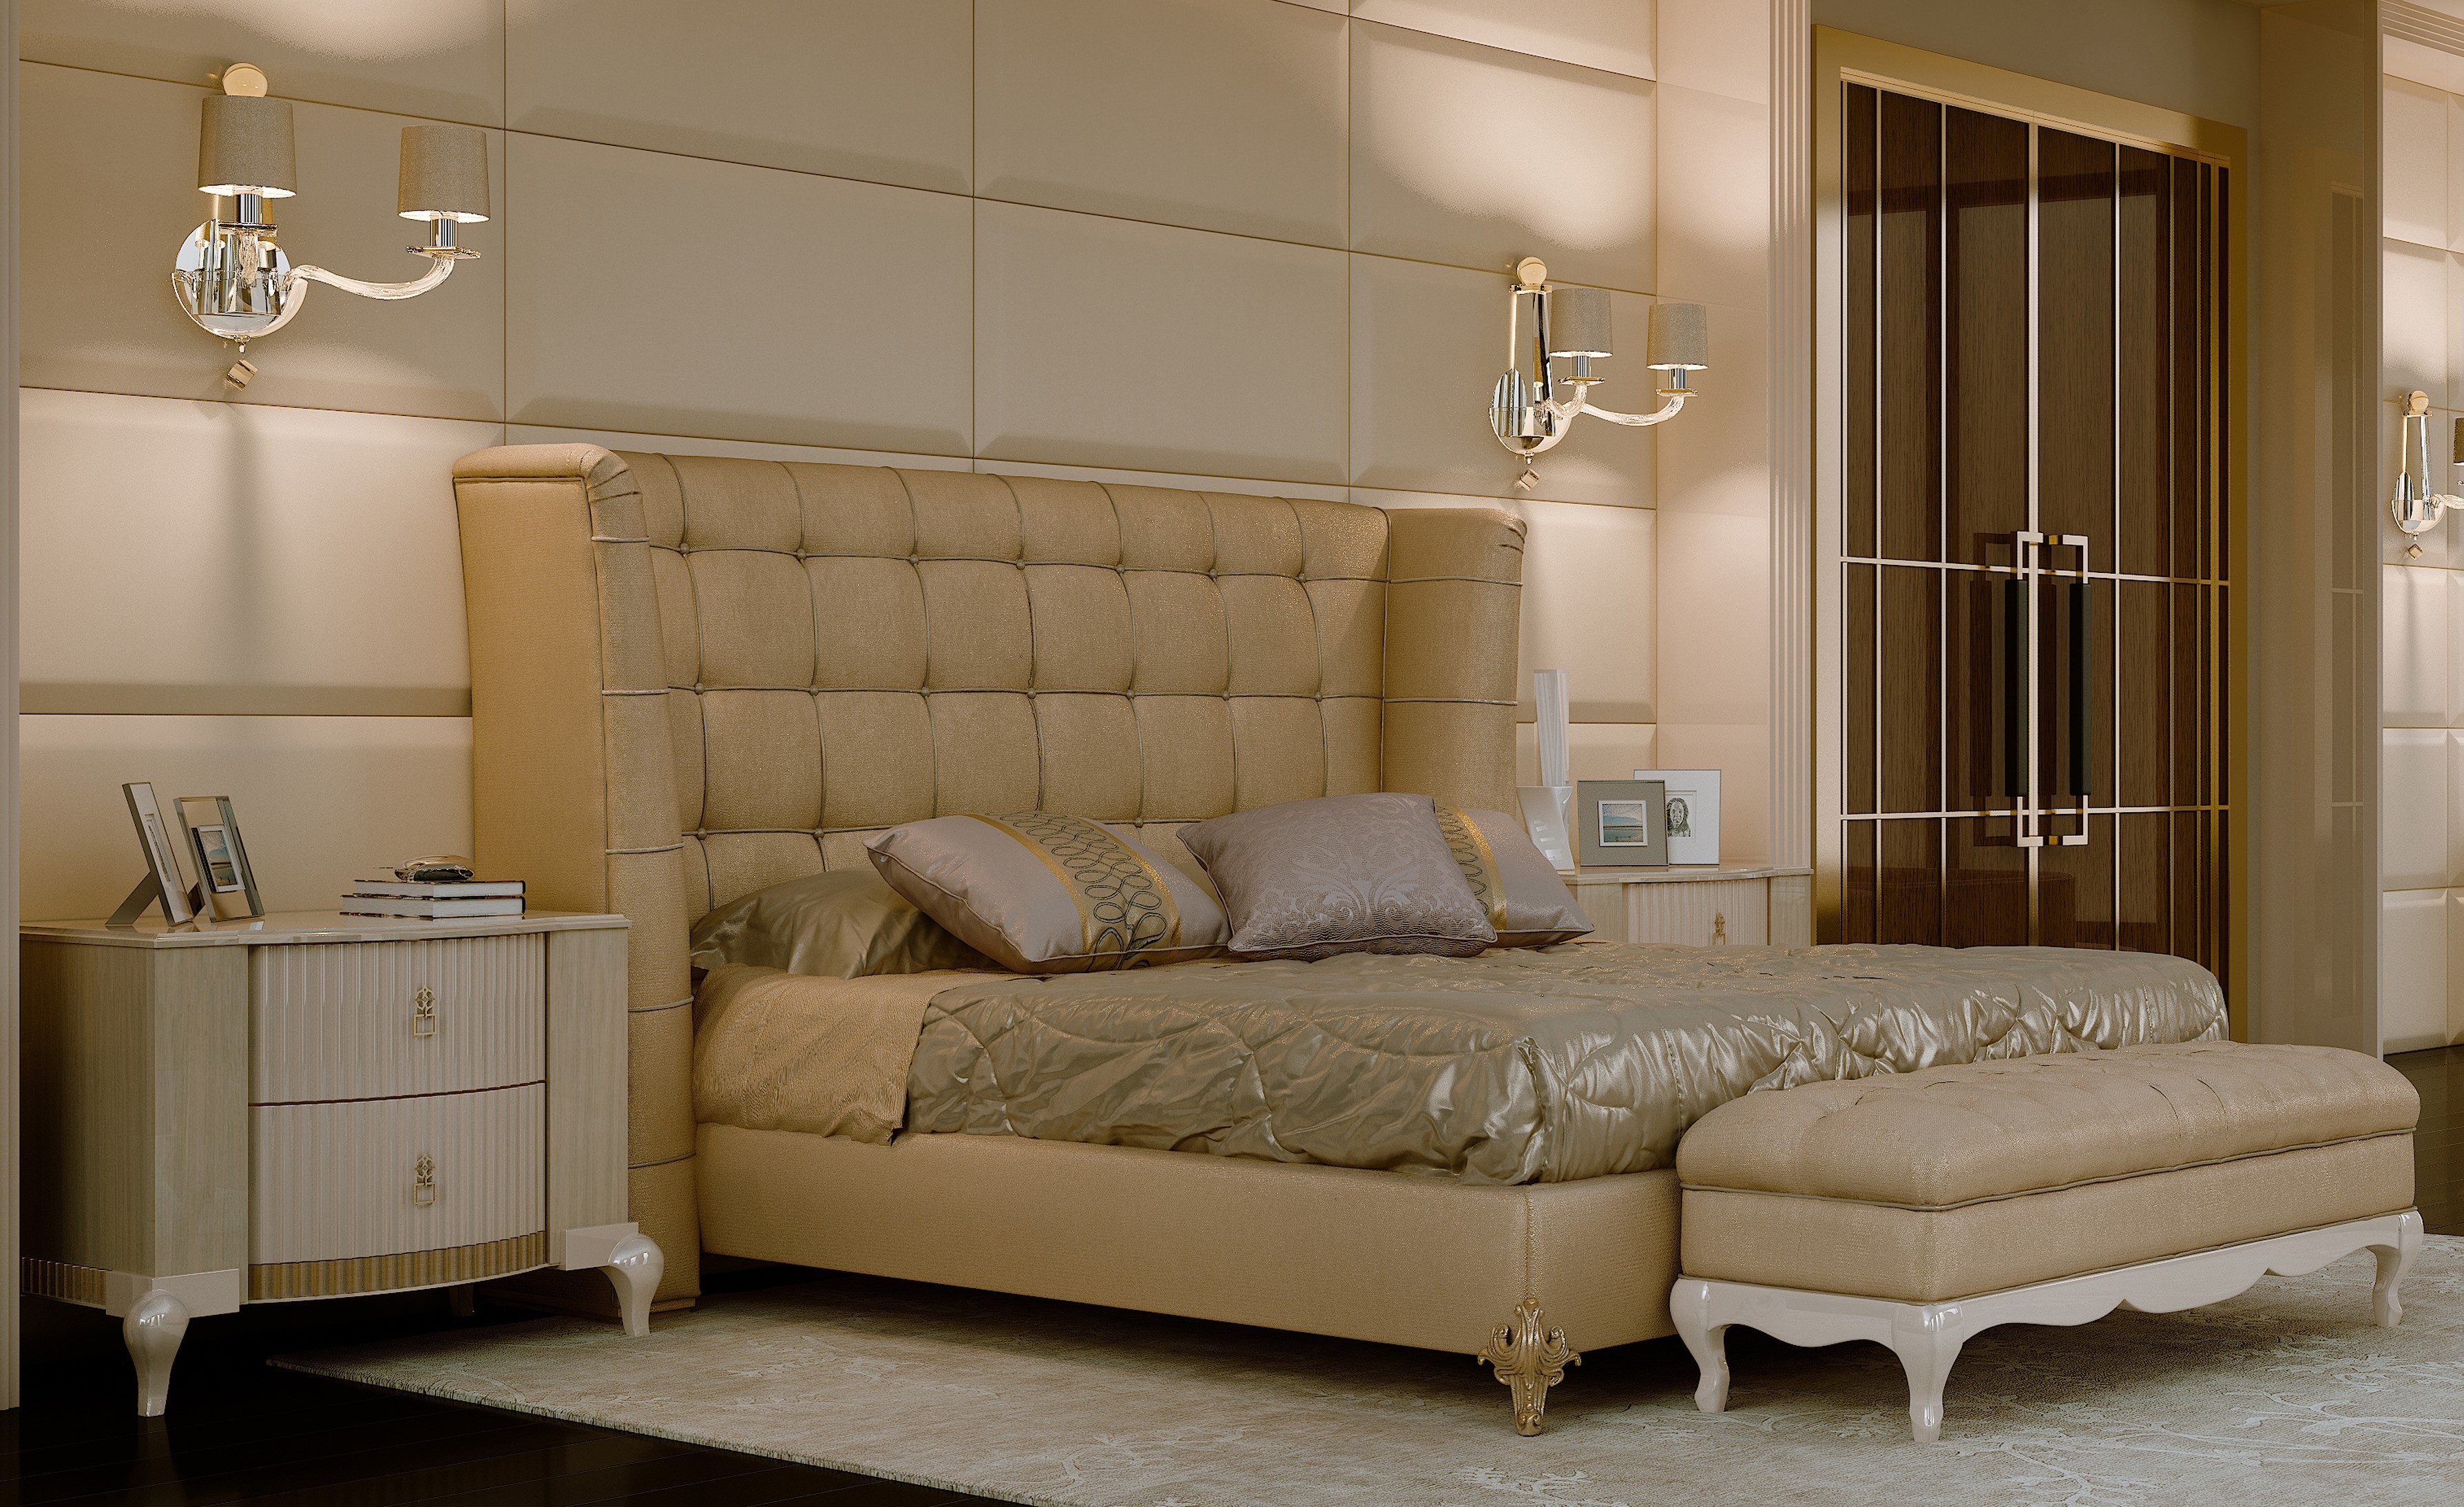 Queen and King Sized Beds Luxurious bed with Tall and tufted headboard